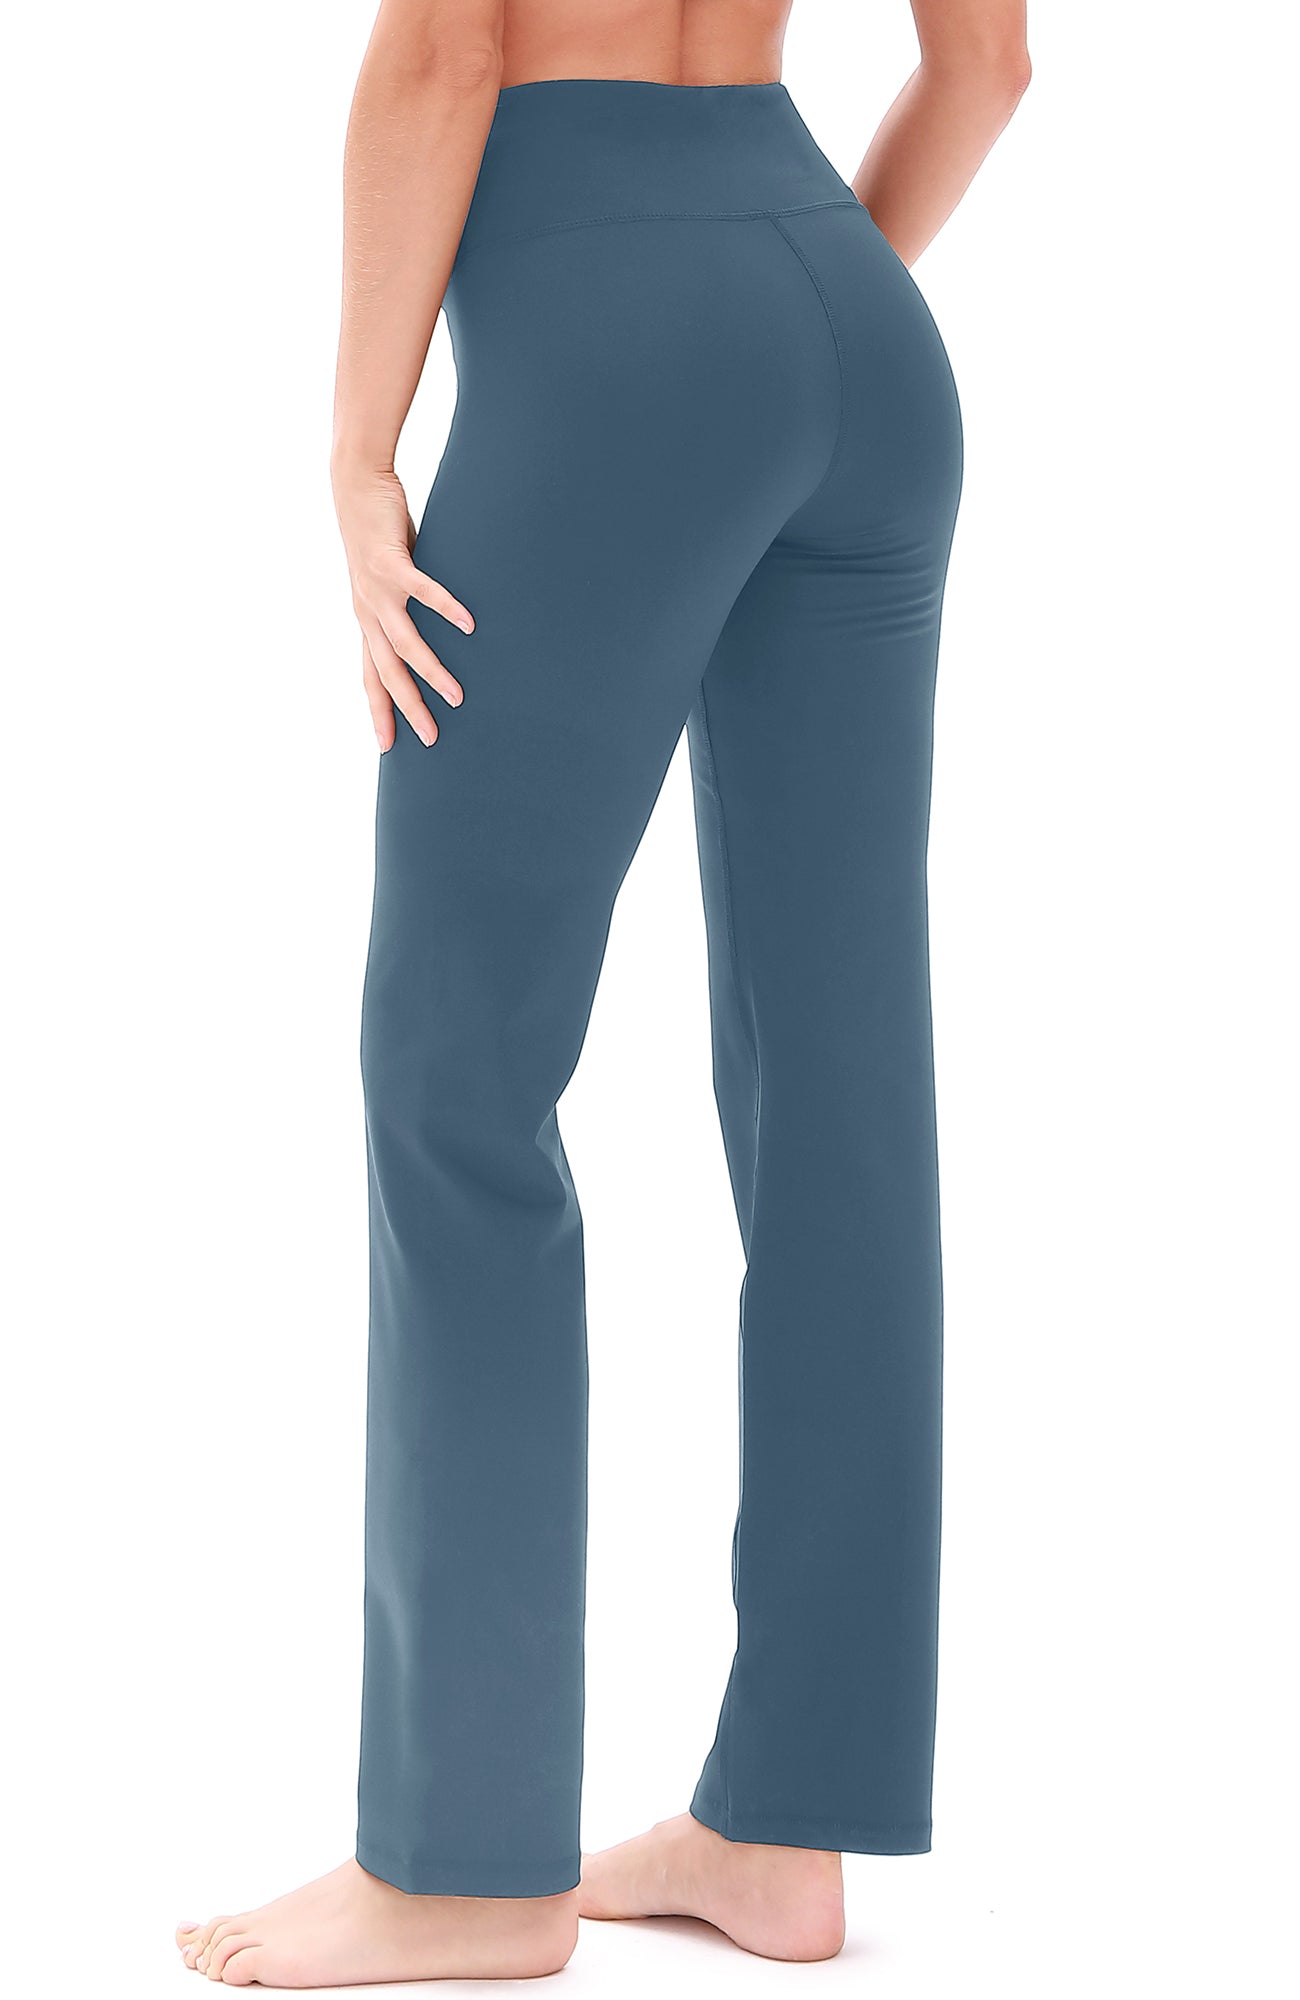 P43 icyzone Bootcut Yoga Pants for Women - Tummy Control Workout